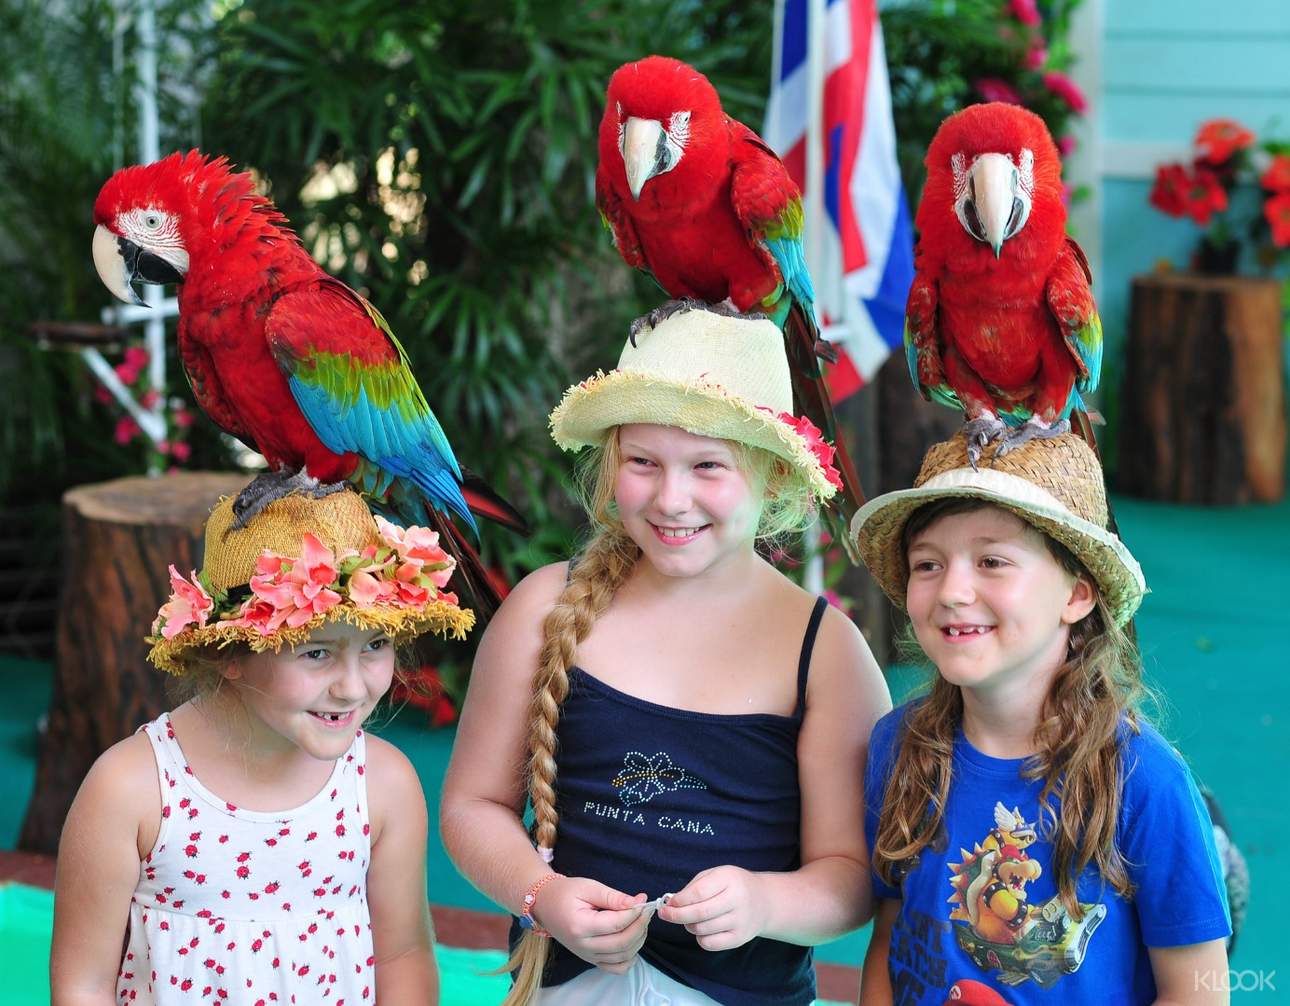 Kids will definitely enjoy meeting colorful parrots and various birds around the park